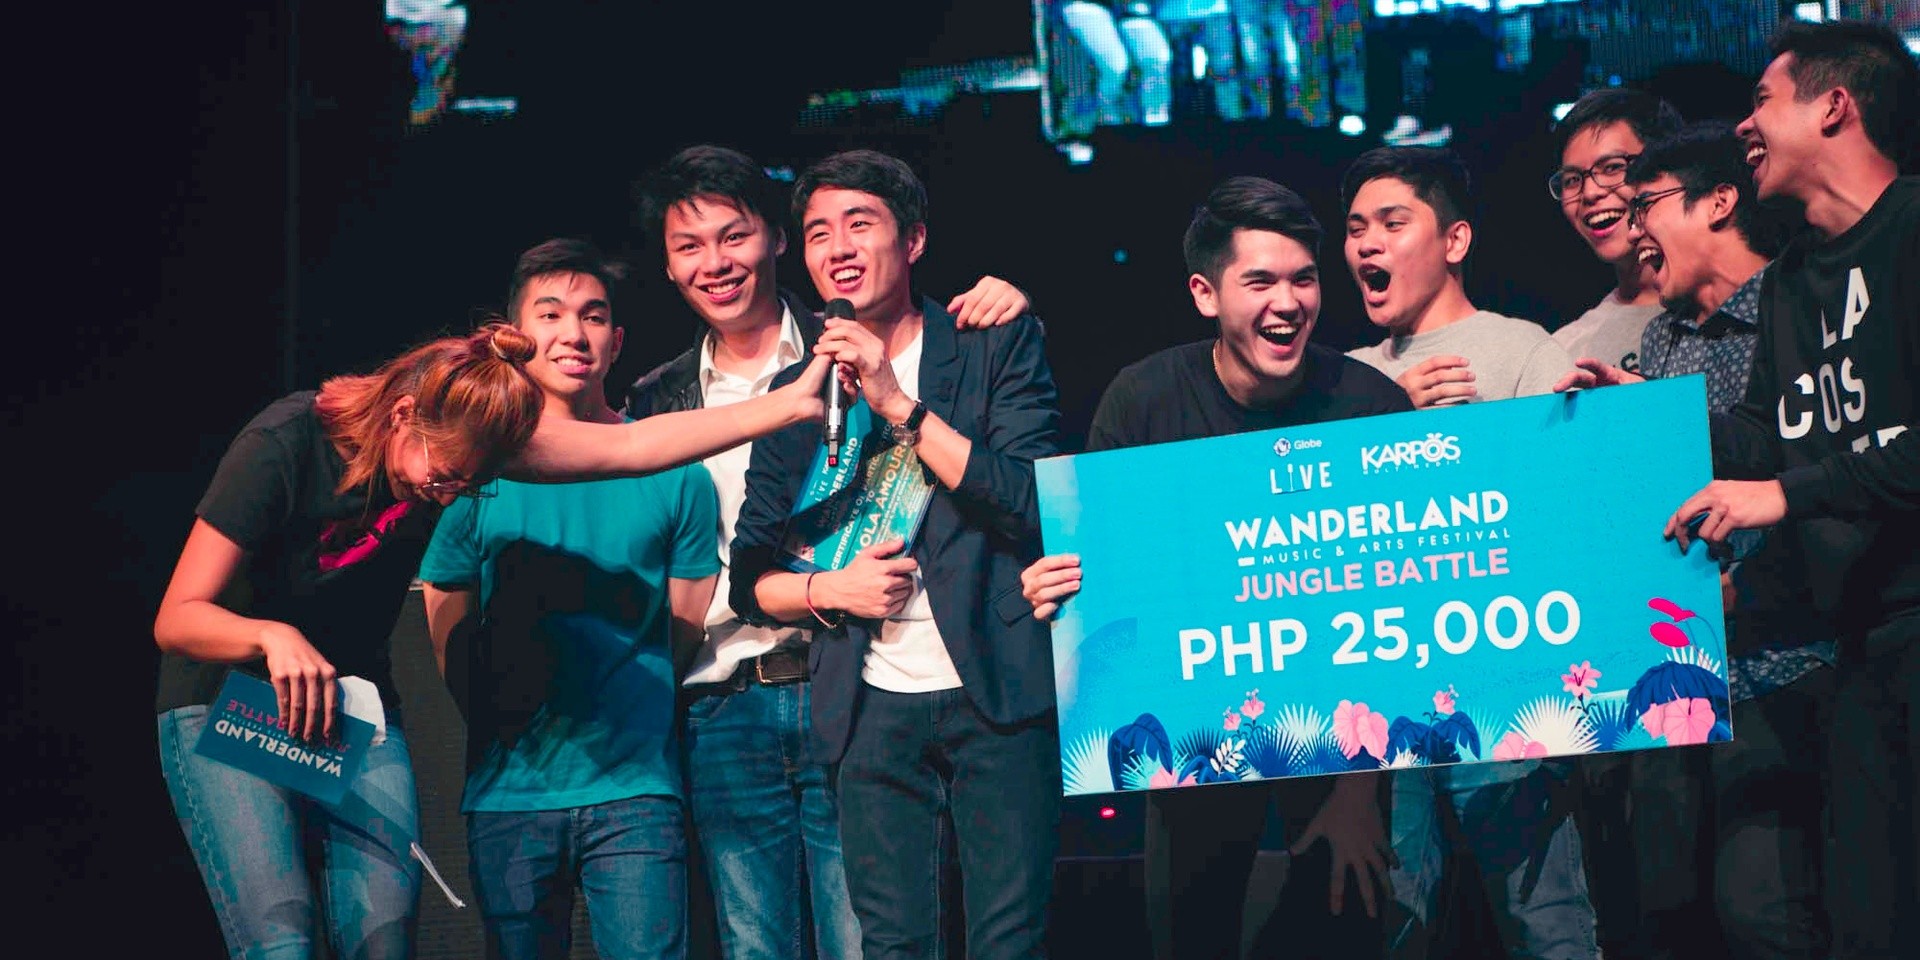 Lola Amour wins Wanderband 2017; Wanderland announce 4 new acts on the line up